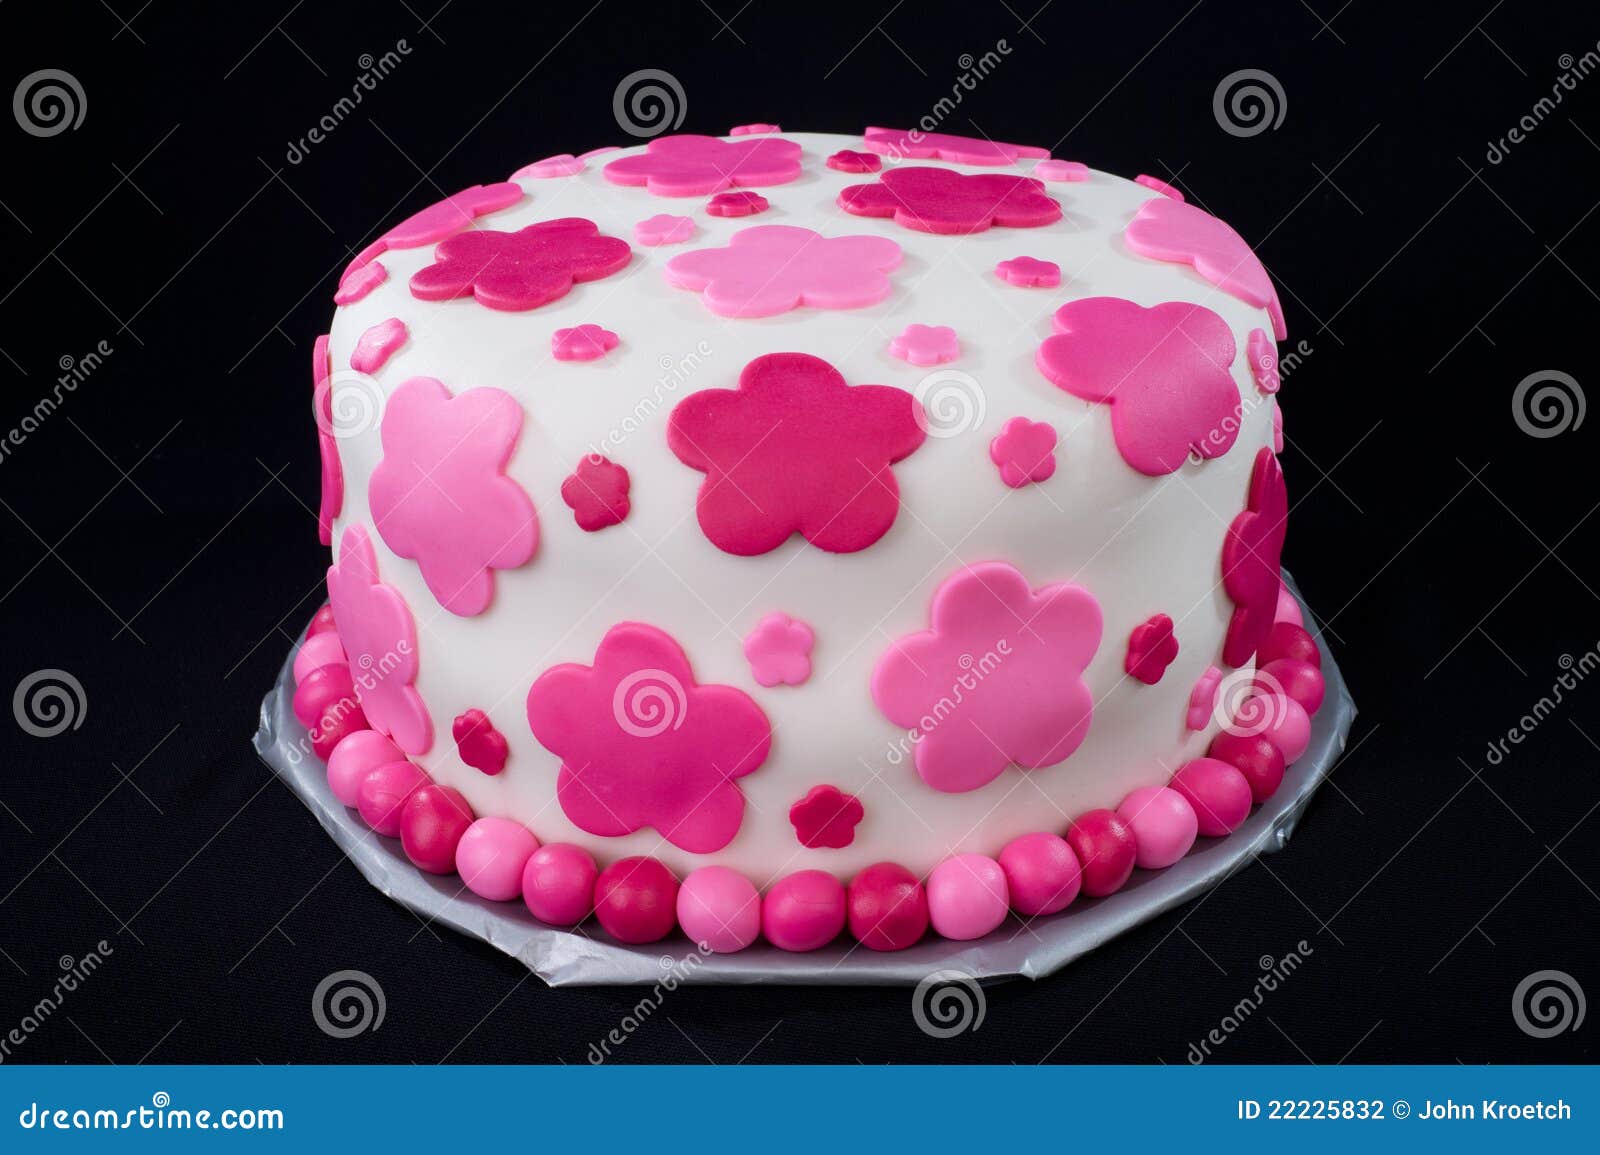 7,077 Black Fondant Cake Royalty-Free Images, Stock Photos & Pictures